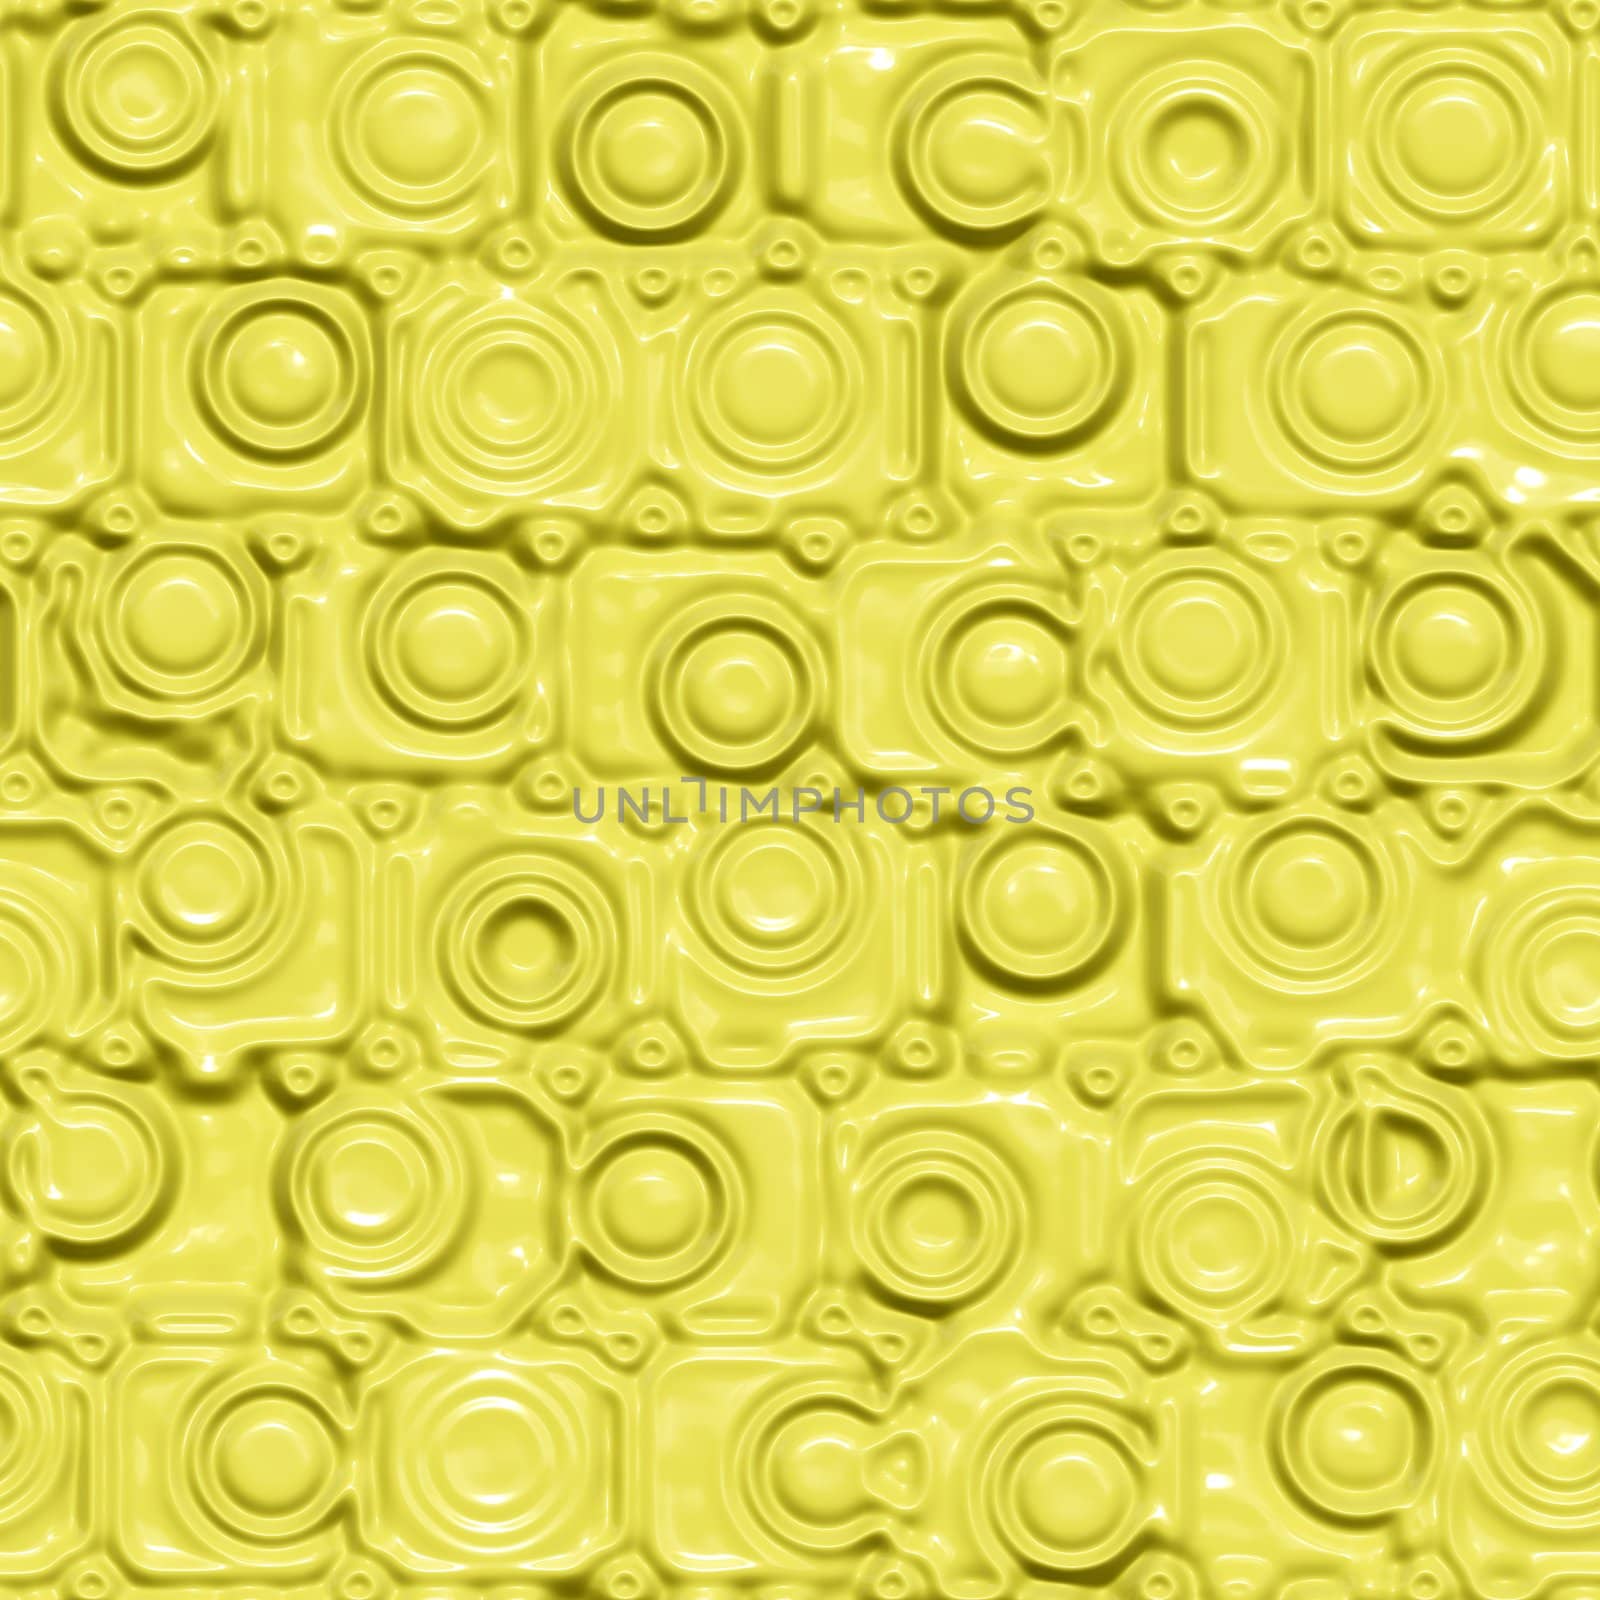 seamless 3d plastic texture with abstract imprinted dots and blocks in yellow